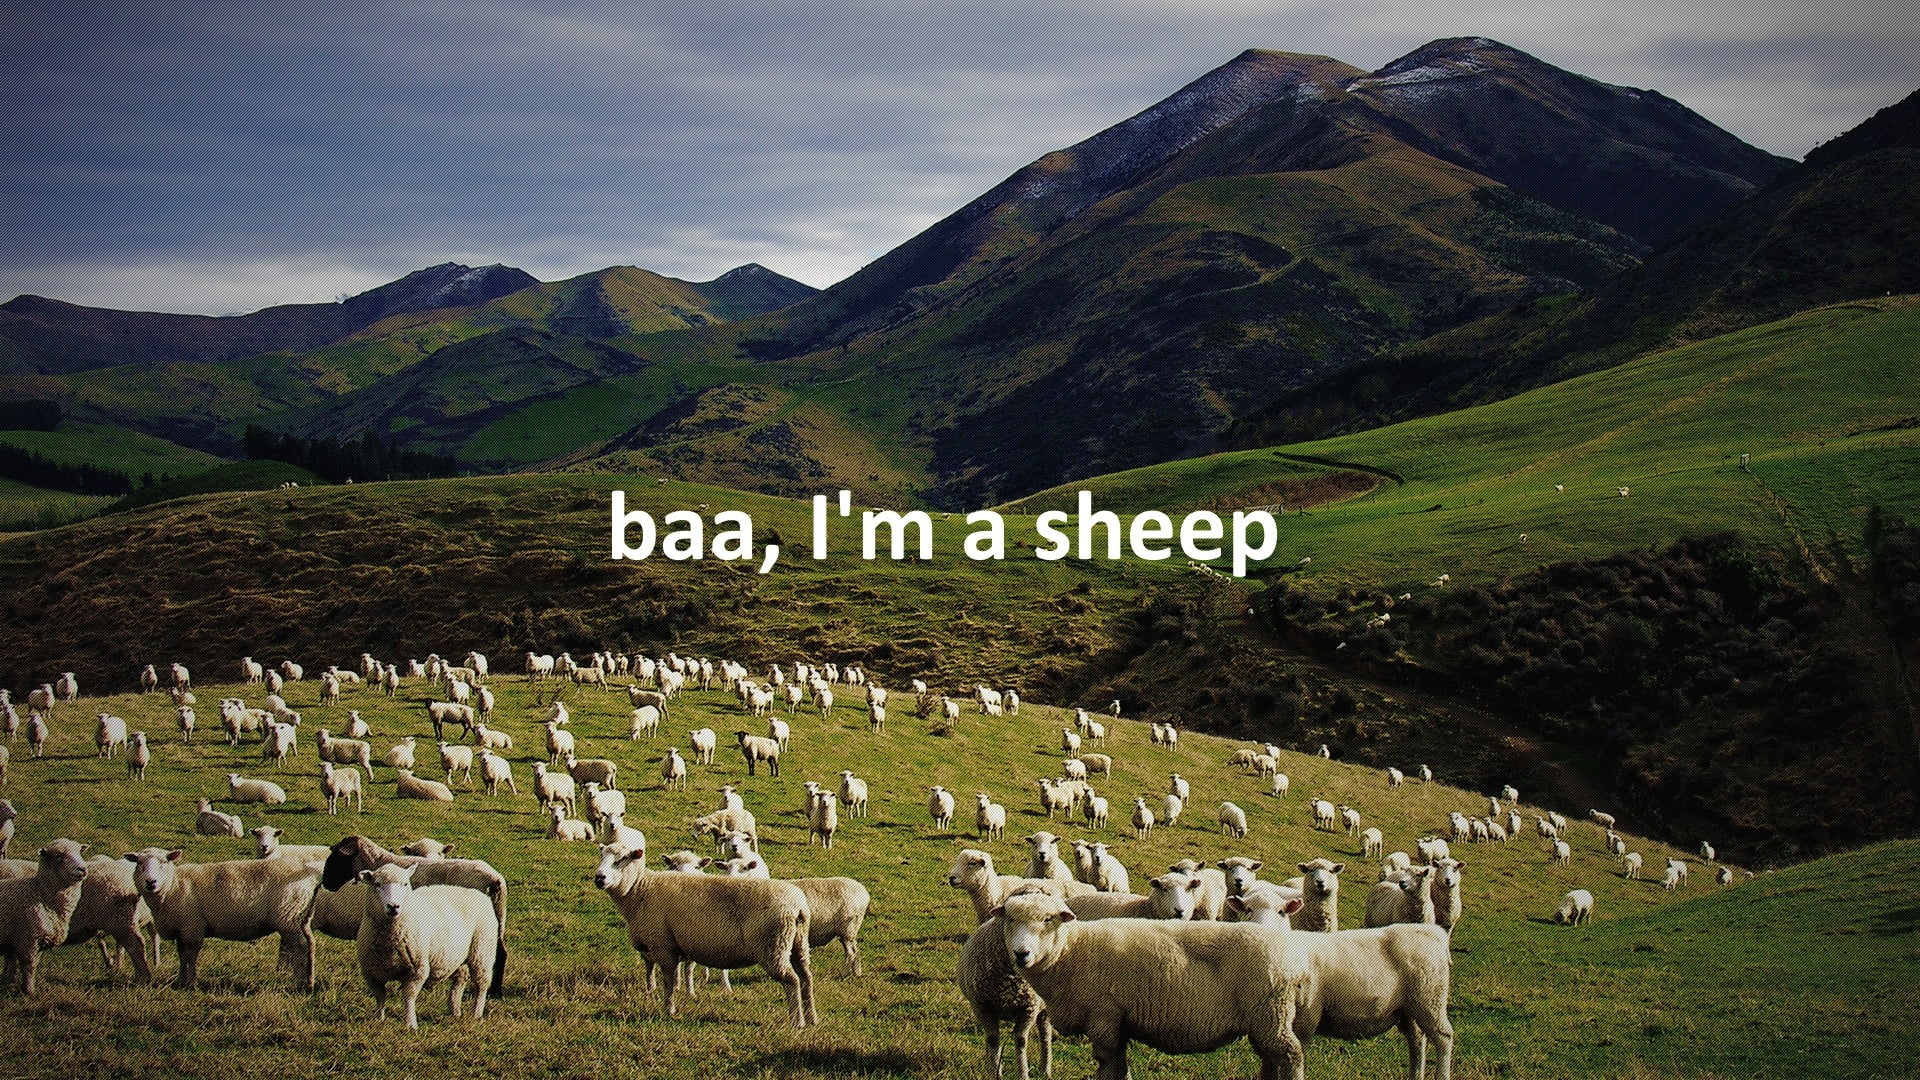 herd of white sheeps with baa, i'm a sheep text overlay, sheep, landscape, animals